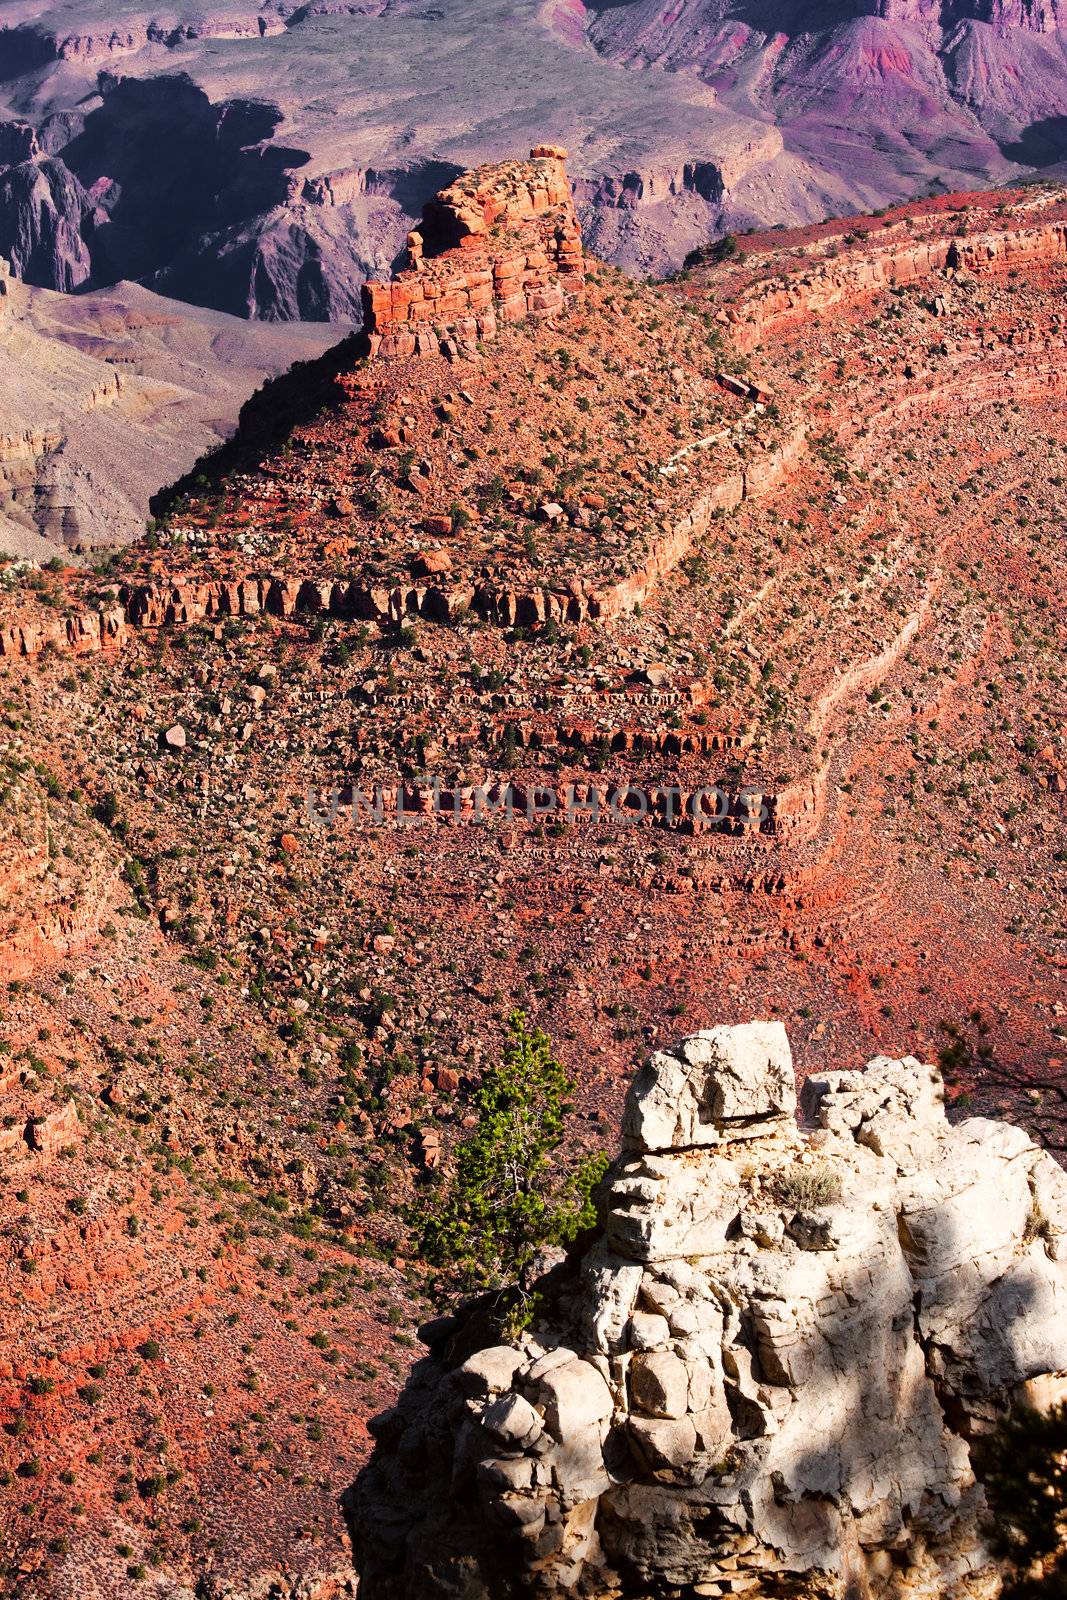 Detail of the Battleship Formation ridge inside the Grand Canyon